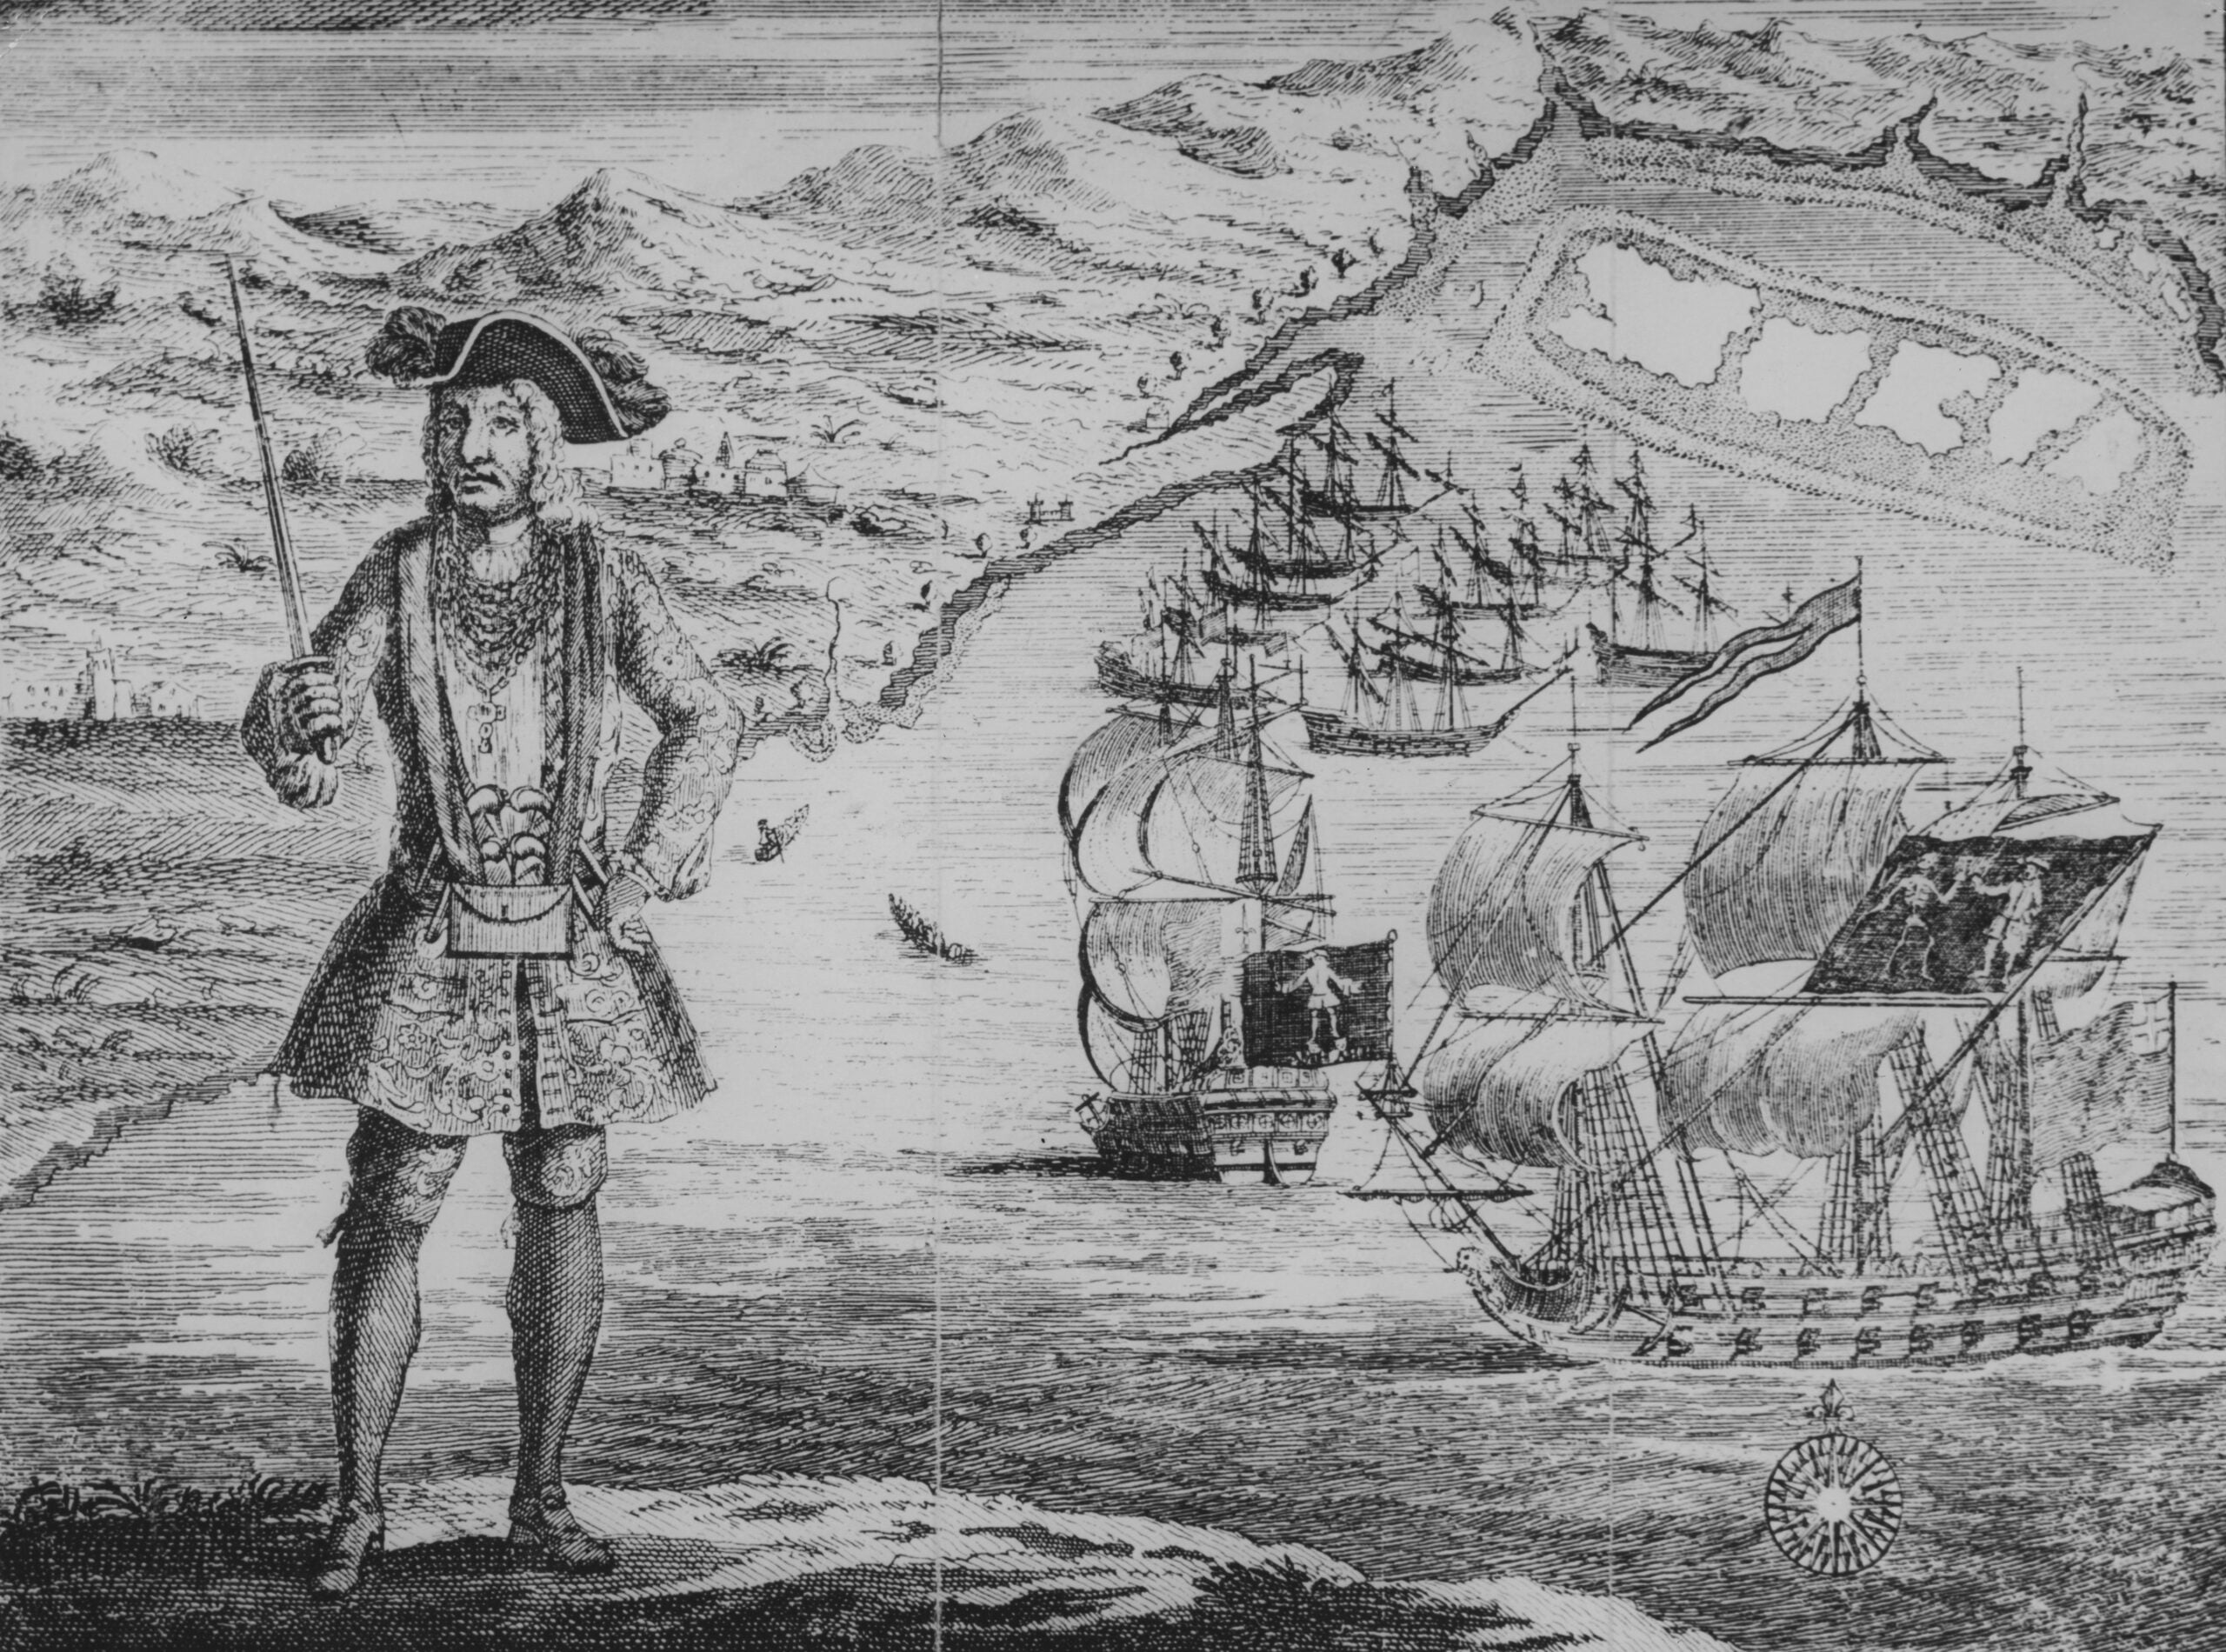 Welsh pirate Bartholomew Roberts (1682 - 1722) pictured off the coast of West Africa, where he met his end shortly after, 11th January 1722. Behind him are two of the ships under his command, 'Royal Fortune' and 'Ranger'. An engraving by B. Cole from 'A History of the Pyrates' by Captain Charles Johnson, c. 1724. (Photo by Hulton Archive/Getty Images)